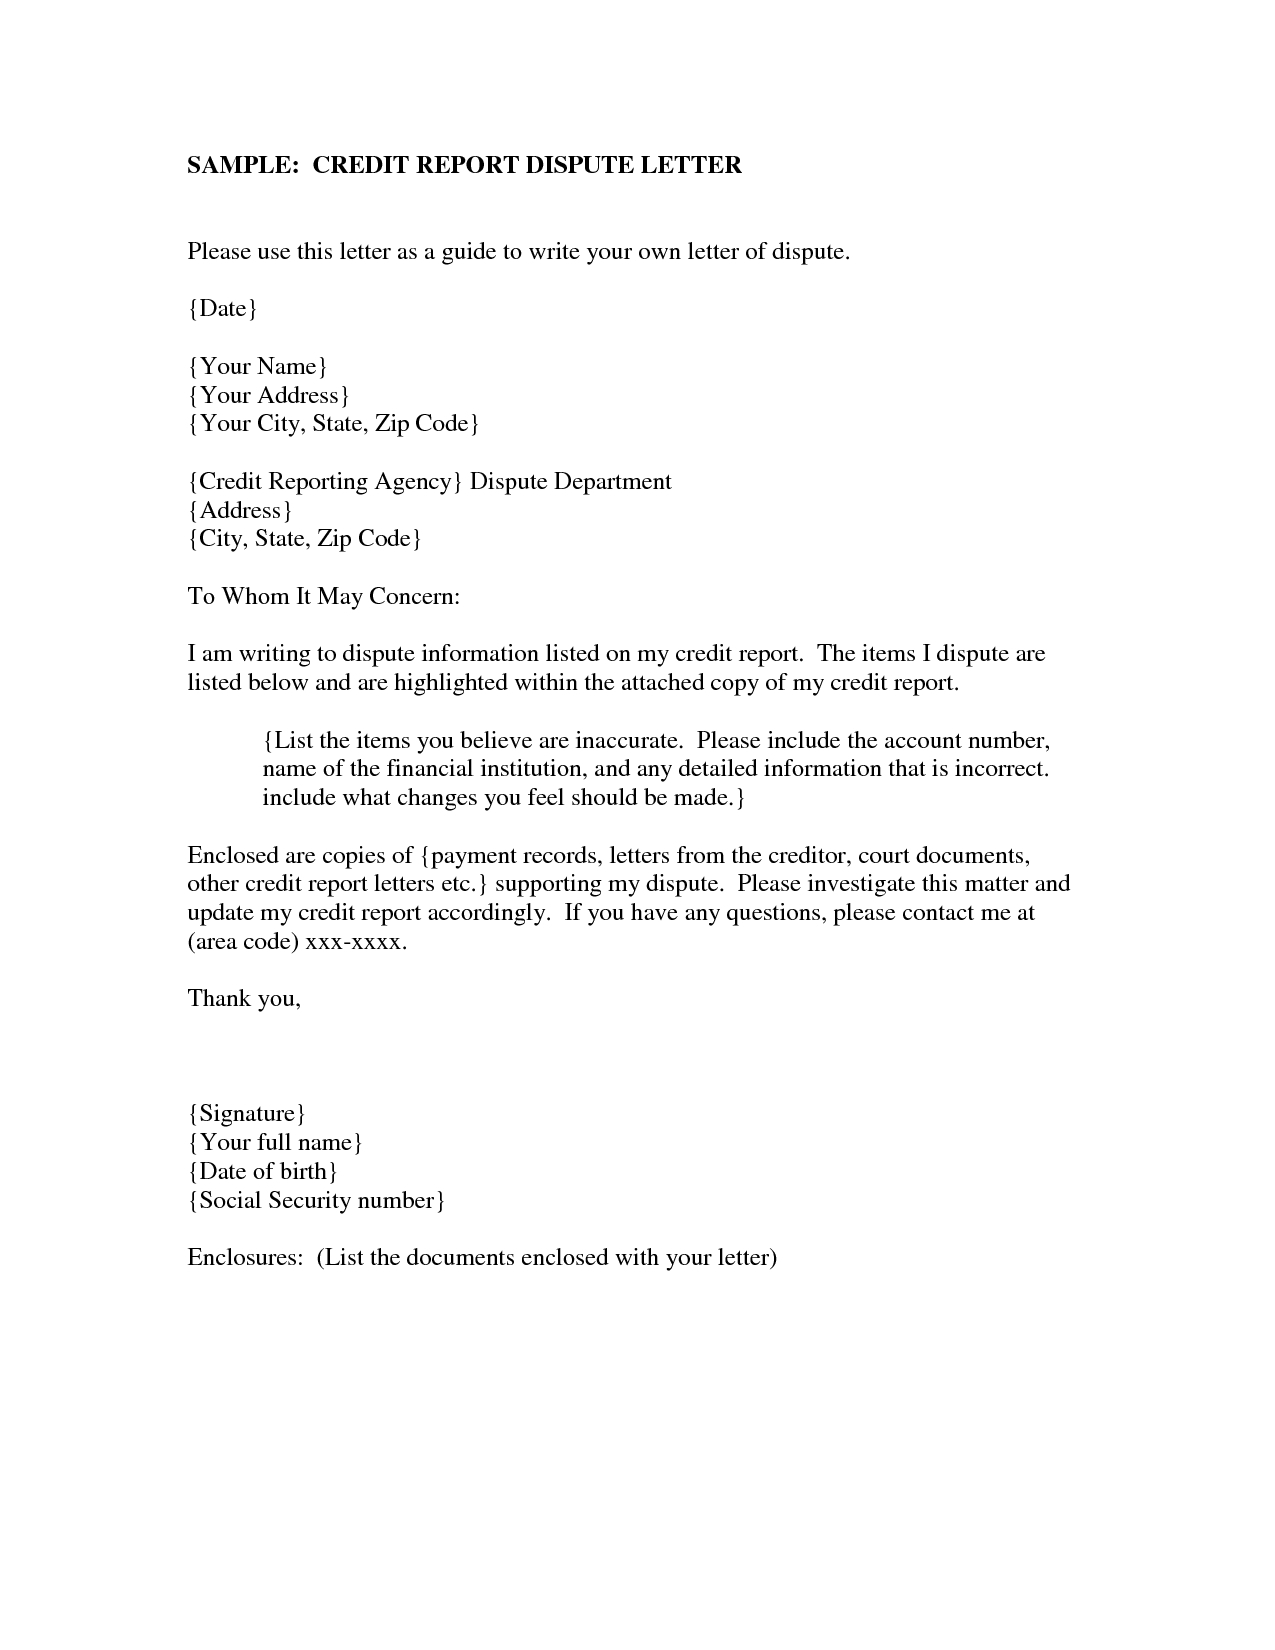 Credit Dispute Letter Template - How to Write Credit Dispute Letter Image Collections Letter format